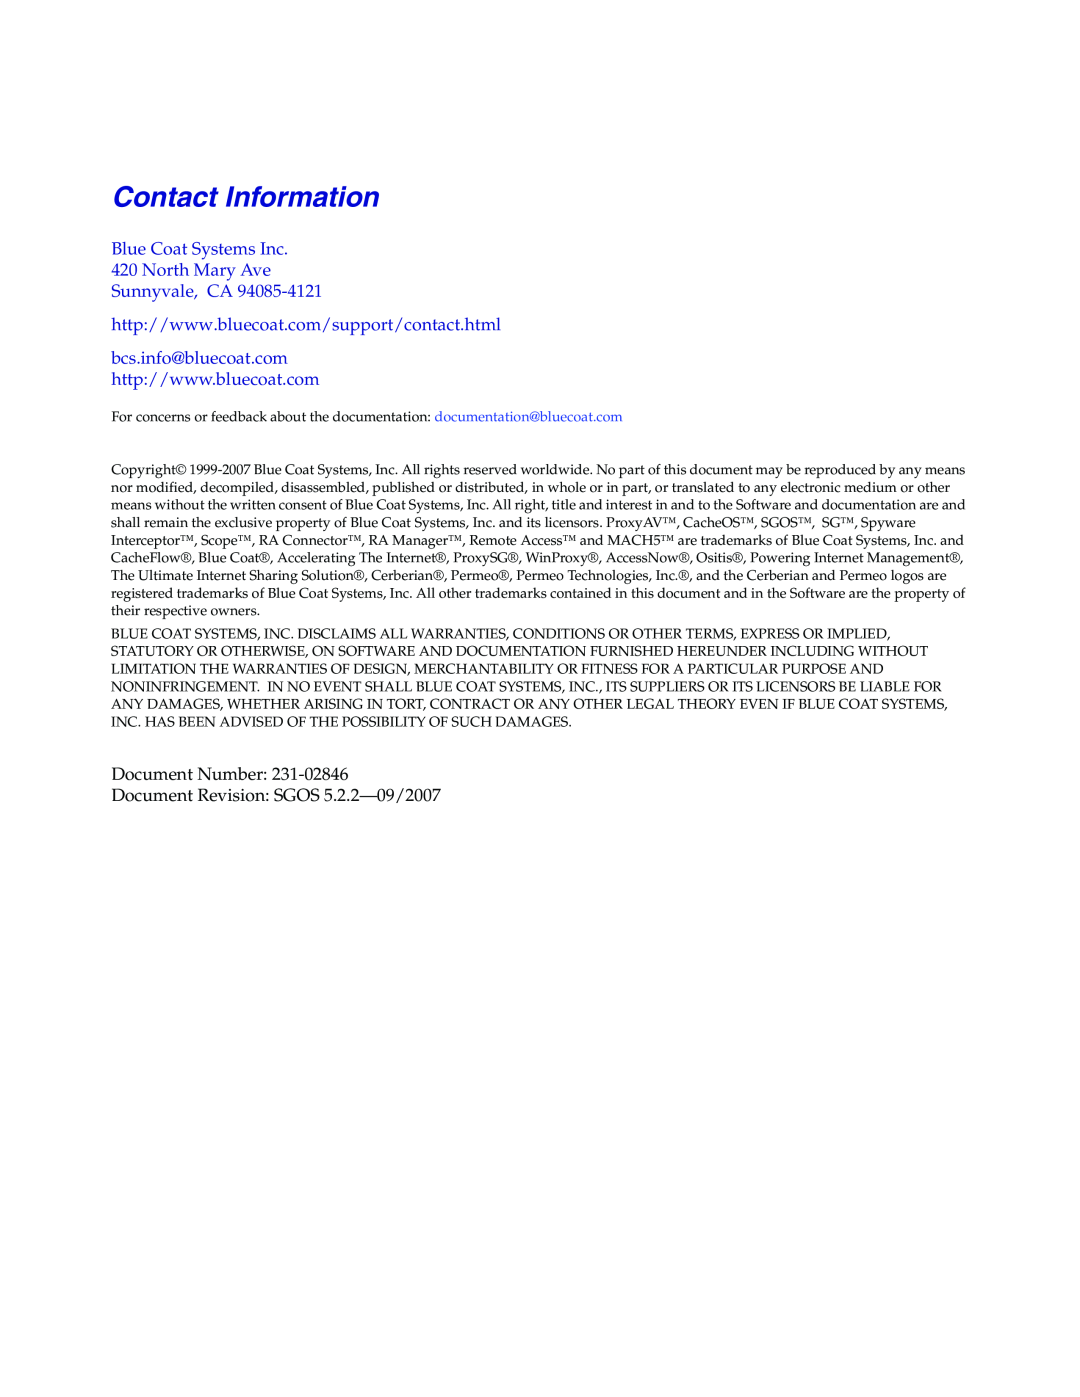 Blue Coat Systems SGOS Version 5.2.2 manual Contact Information, Blue Coat Systems Inc 420 North Mary Ave, Sunnyvale, CA 